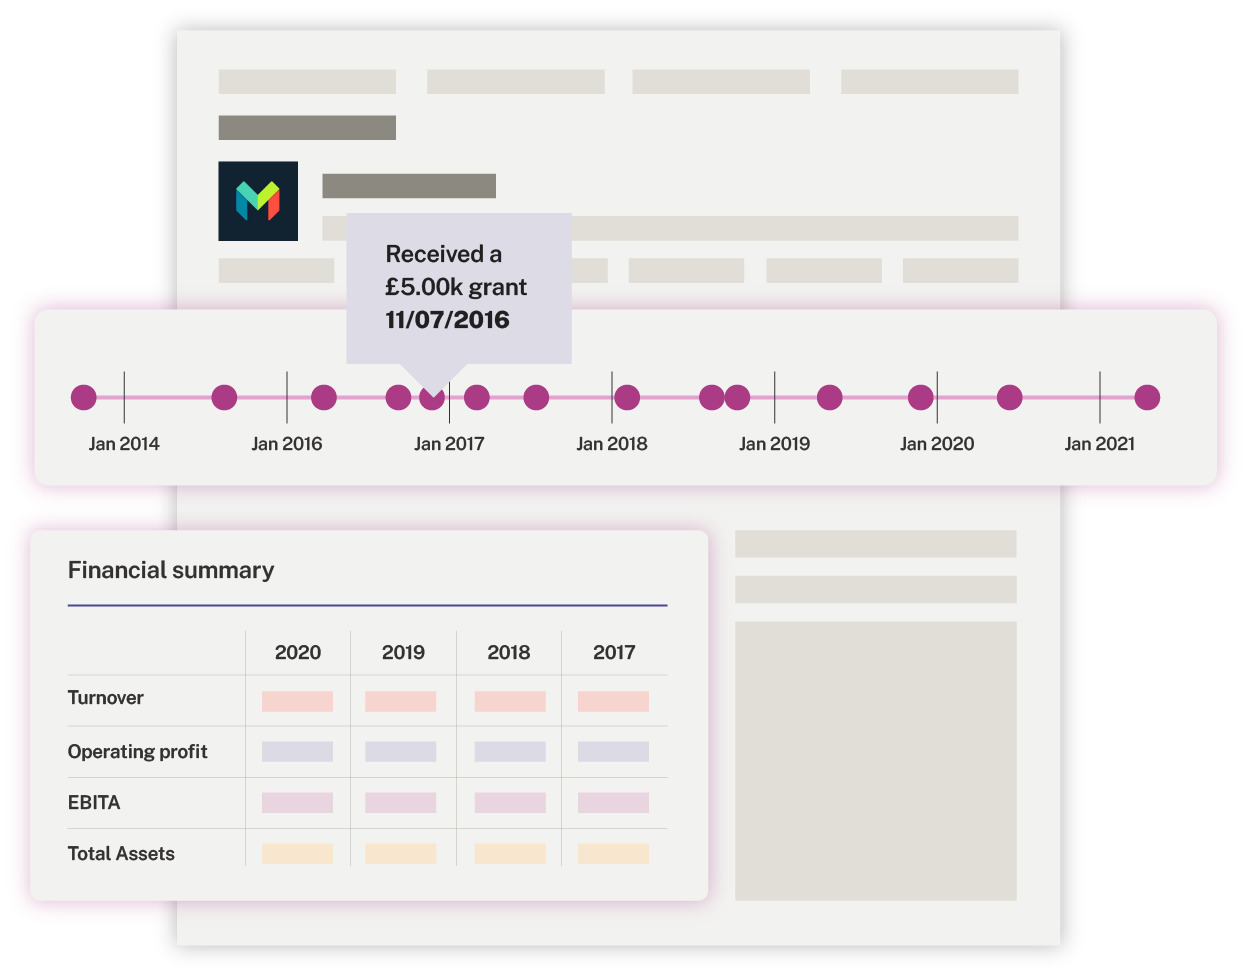 An example UK company profile on Beauhurst showing timeline and financial summary